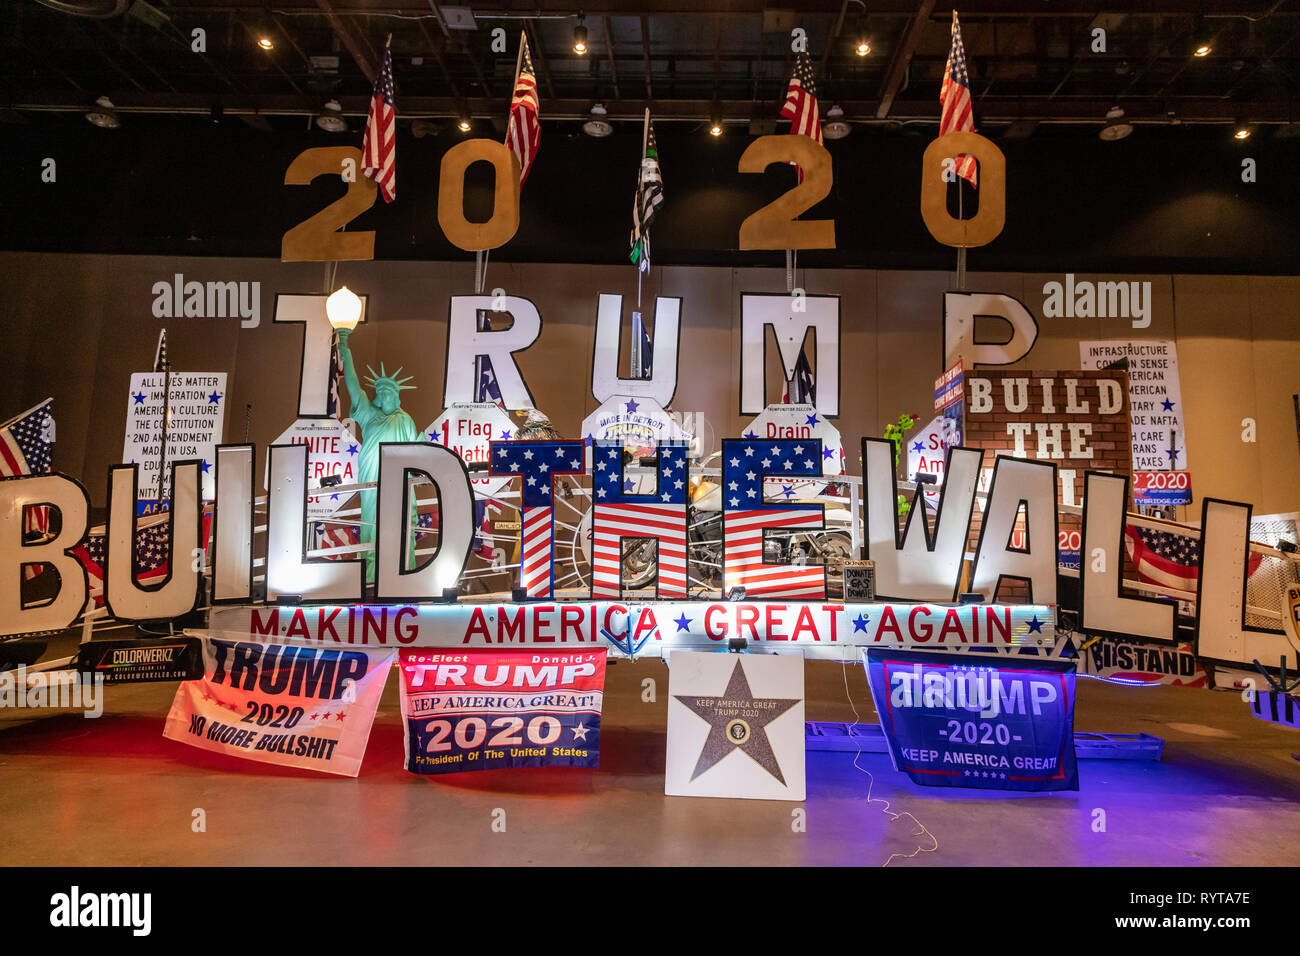 Detroit, Michigan USA - 14 March 2019 - A Trump 2020 Build the Wall float was displayed at a public meeting to promote construction of a wall along the Mexican border. The 'We Build the Wall' event promoted an organization of the same name that is trying to raise individual contributions to fund wall construction. Credit: Jim West/Alamy Live News Stock Photo